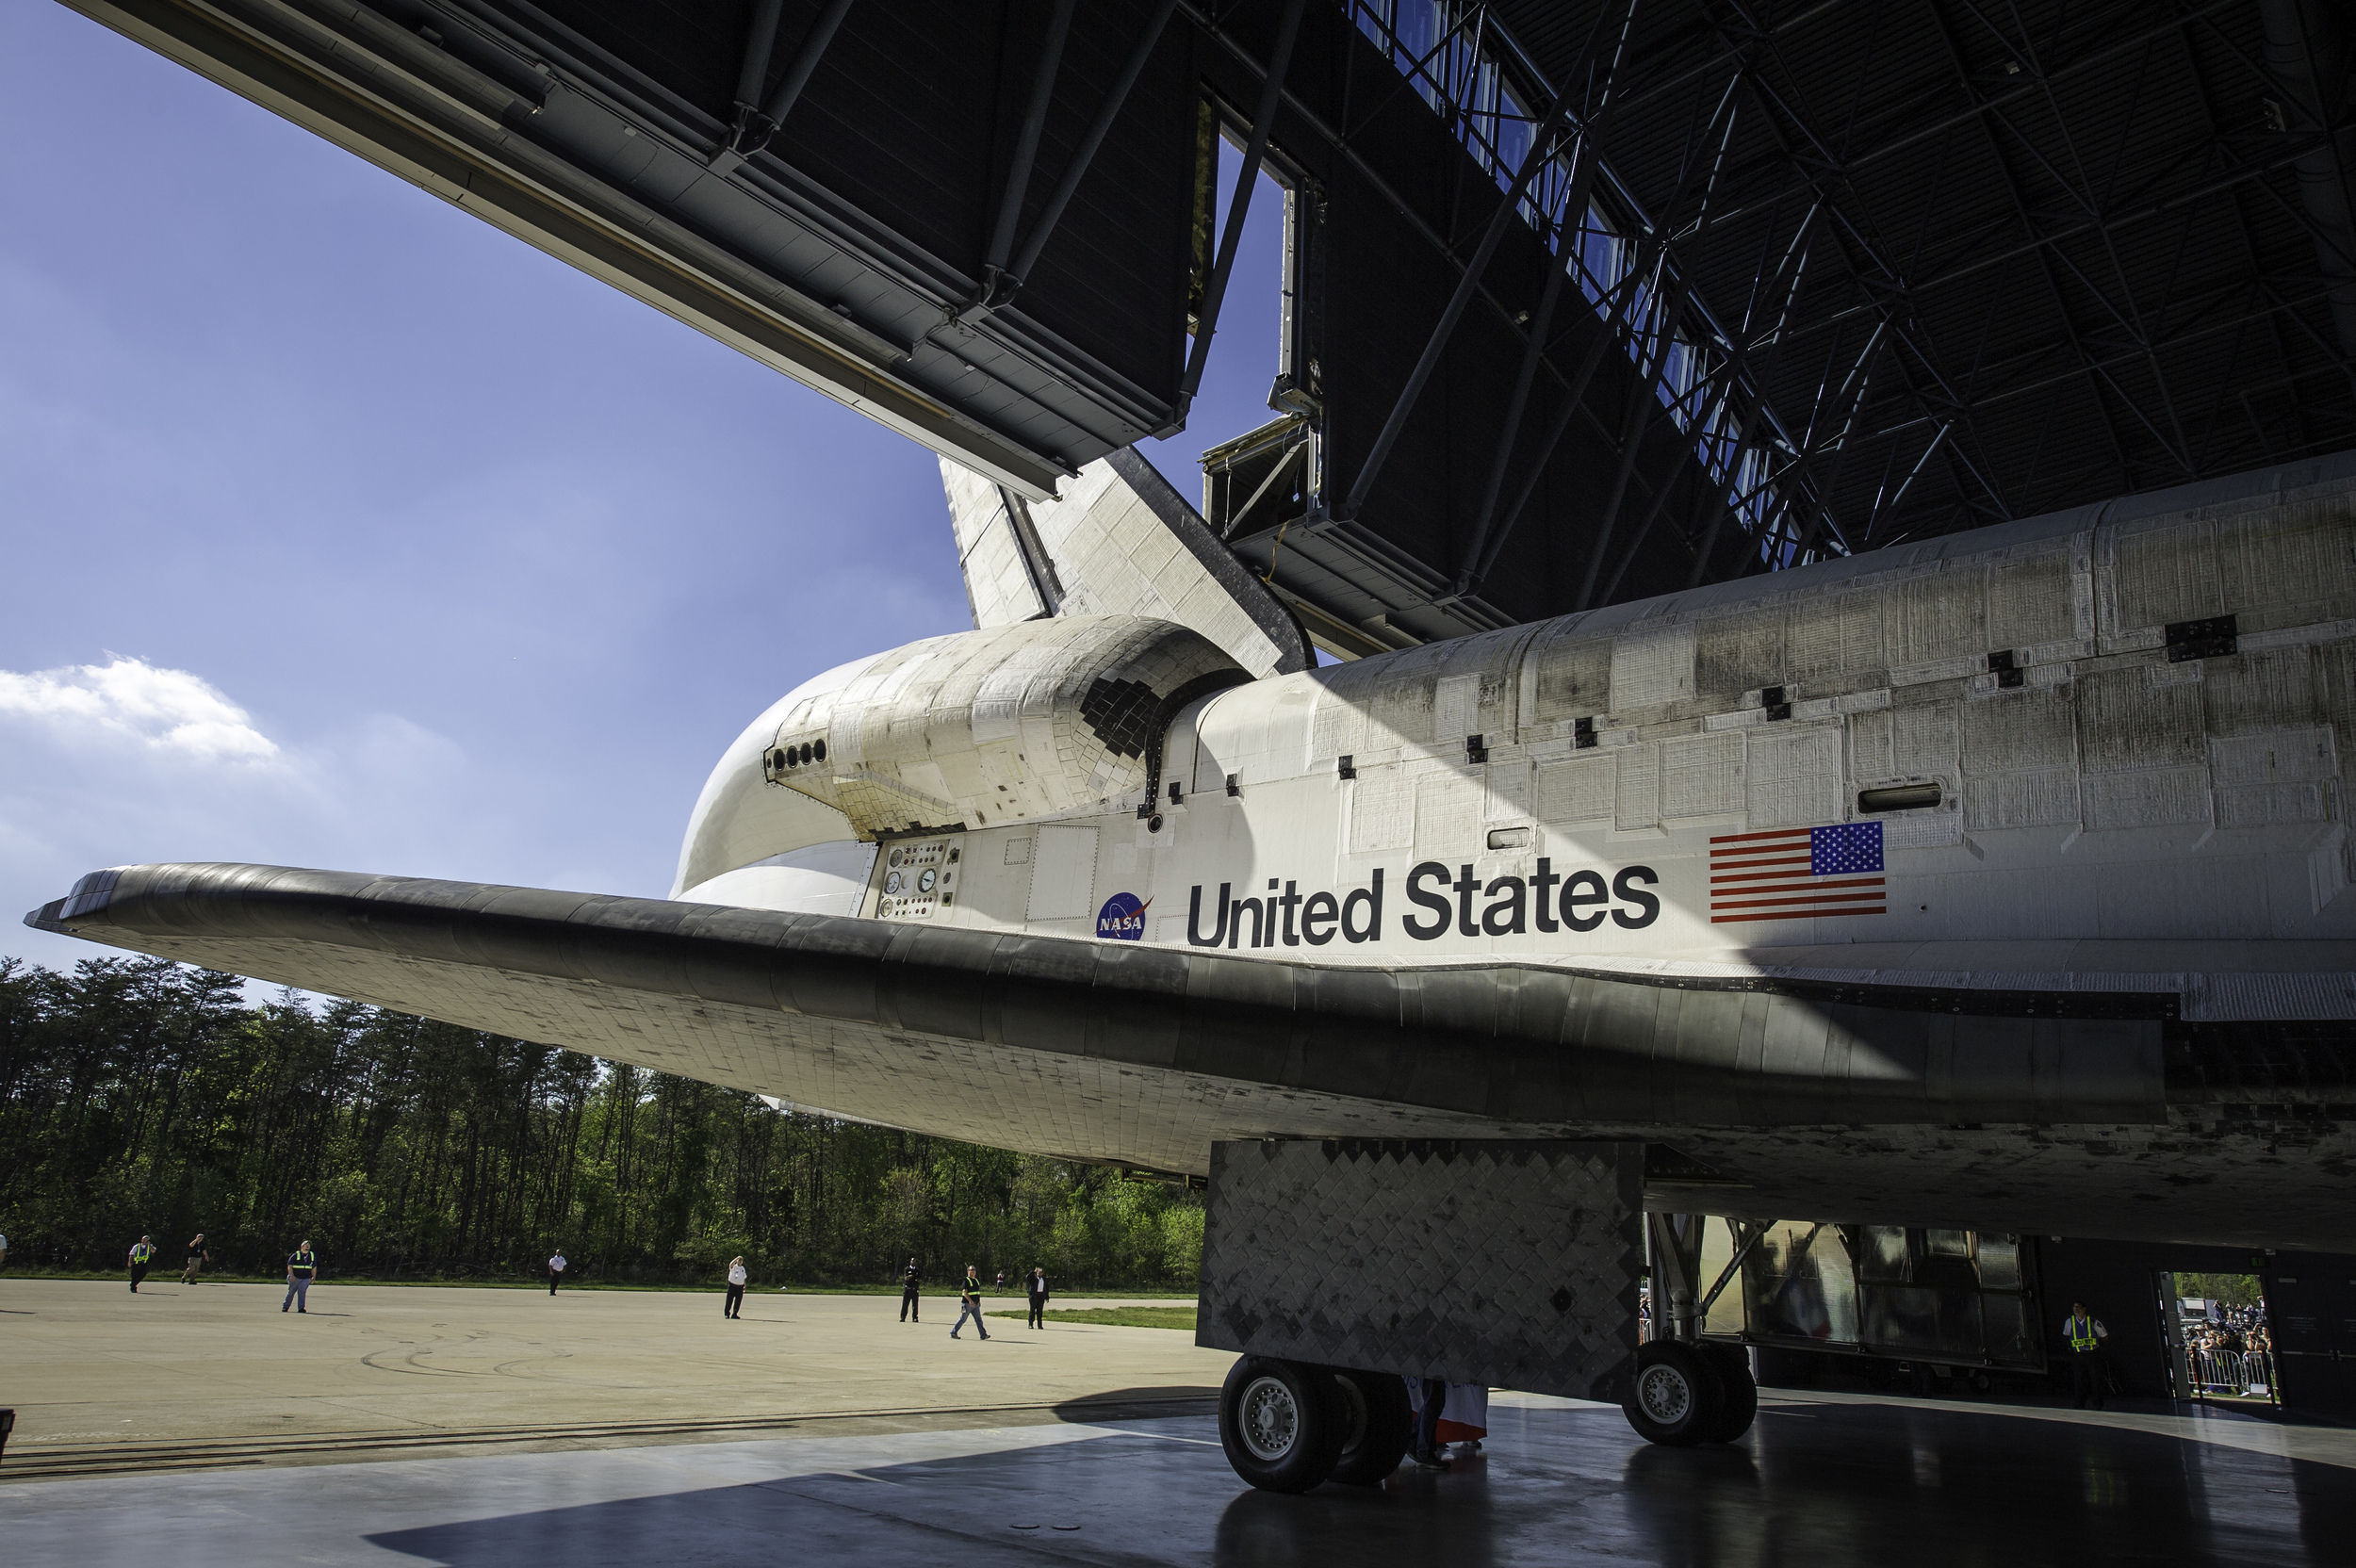  Space shuttle Discovery is rolled into its hangar at the Steven F. Udvar-Hazy Center Thursday, April 19, 2012 in Chantilly, Va. Discovery will be permanently housed at the Udvar-Hazy Center, part of the Smithsonian Institution’s Air and Space Museum